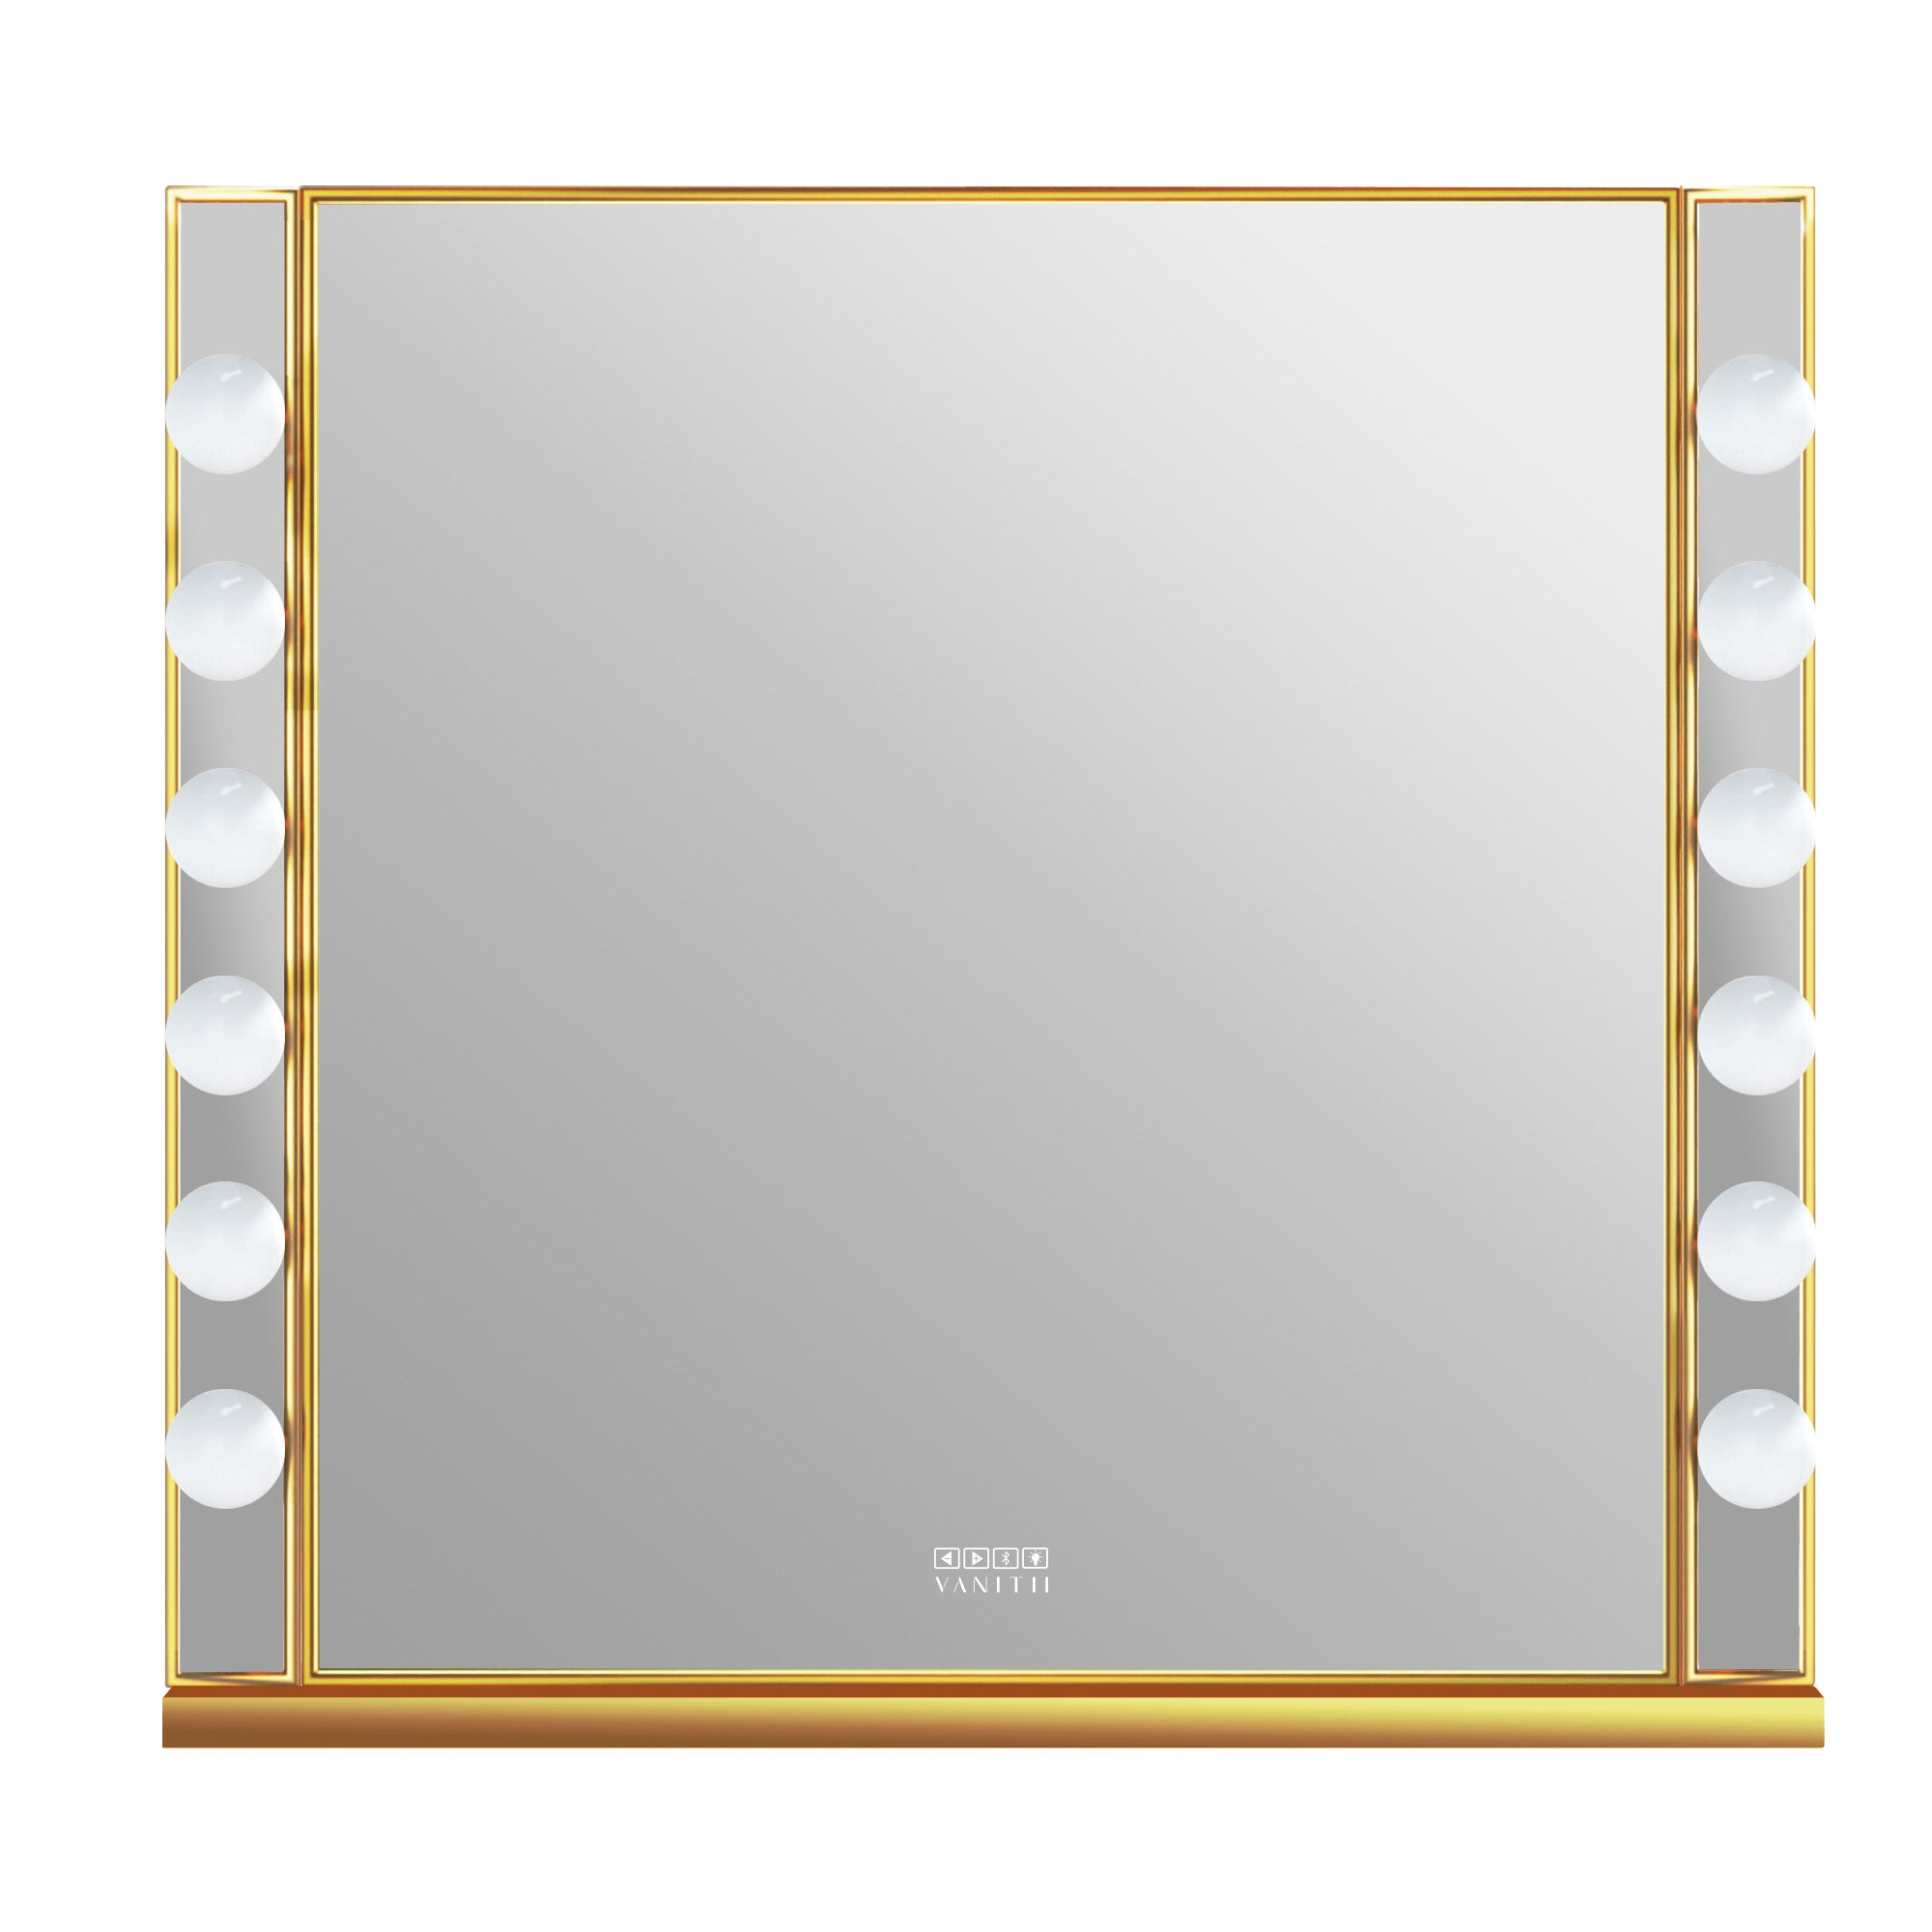 VANITII Chanel Gold Hollywood Vanity Mirror - 12 Dimmable LED Bulbs